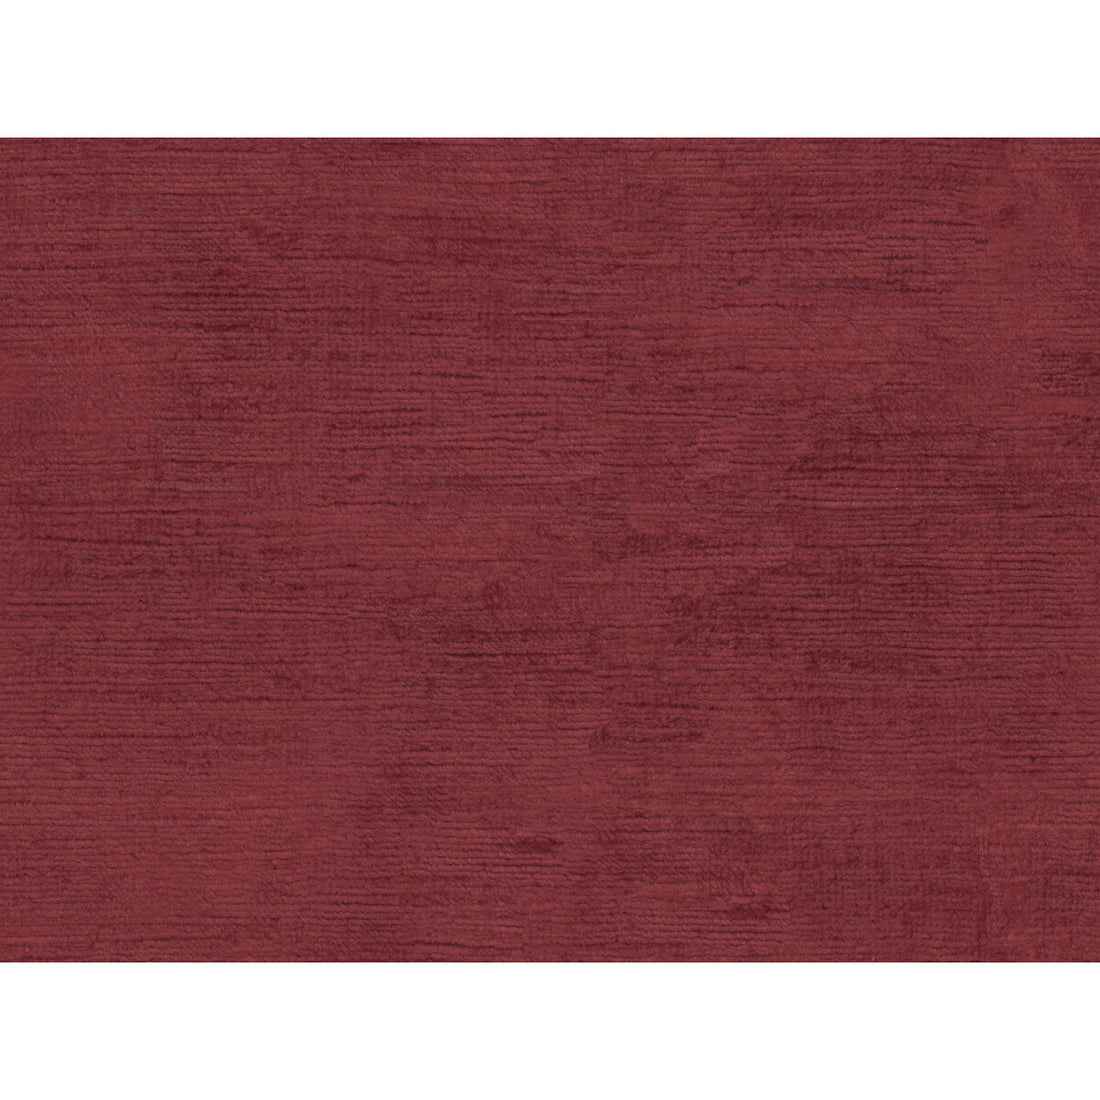 Fulham Linen V fabric in ruby color - pattern 2016133.9.0 - by Lee Jofa